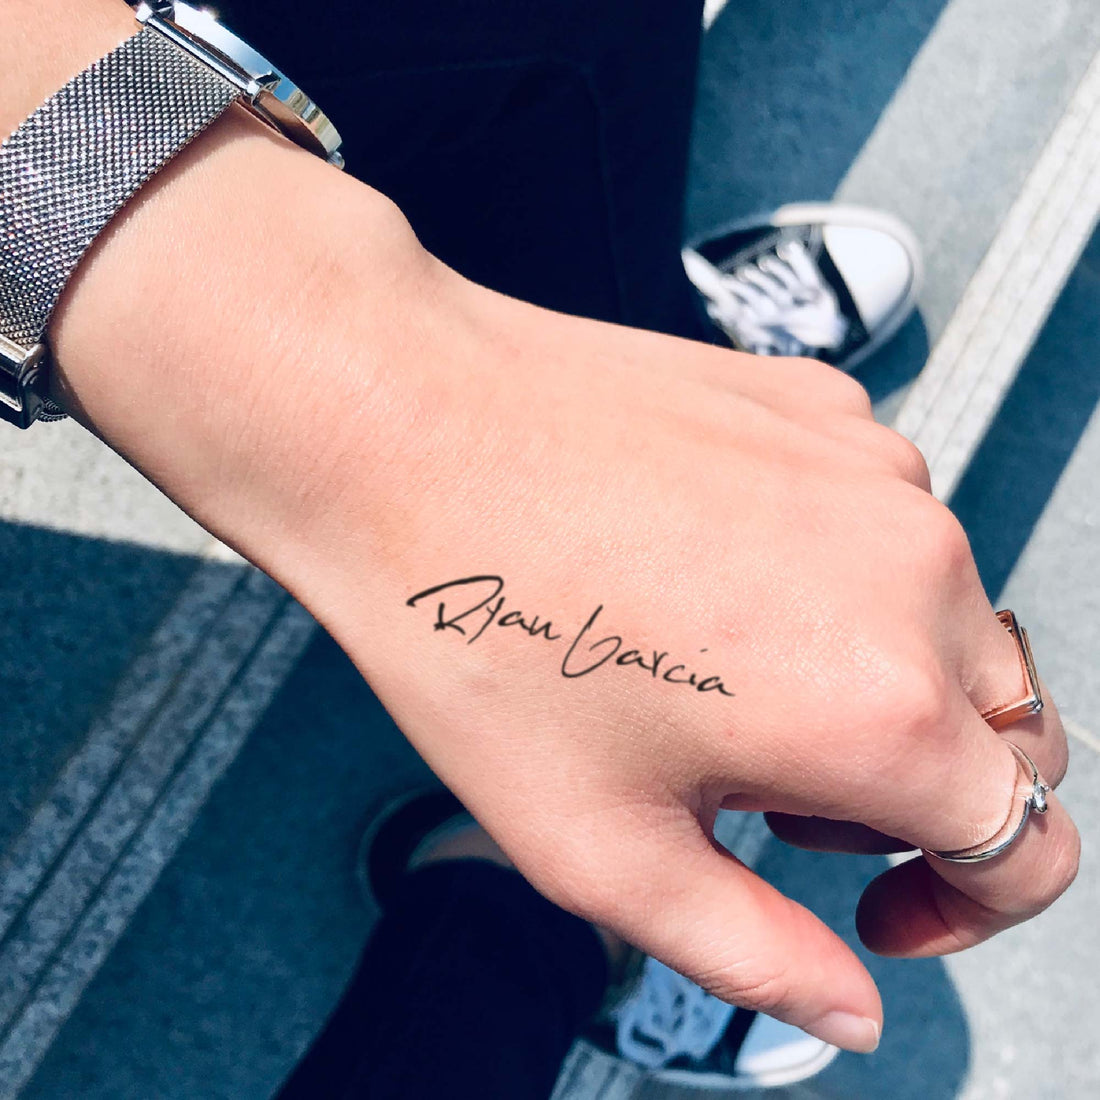 Ryan Garcia custom temporary tattoo sticker design idea inspiration meanings removal arm wrist hand words font name signature calligraphy lyrics tour concert outfits merch accessory gift souvenir costumes wear dress up code